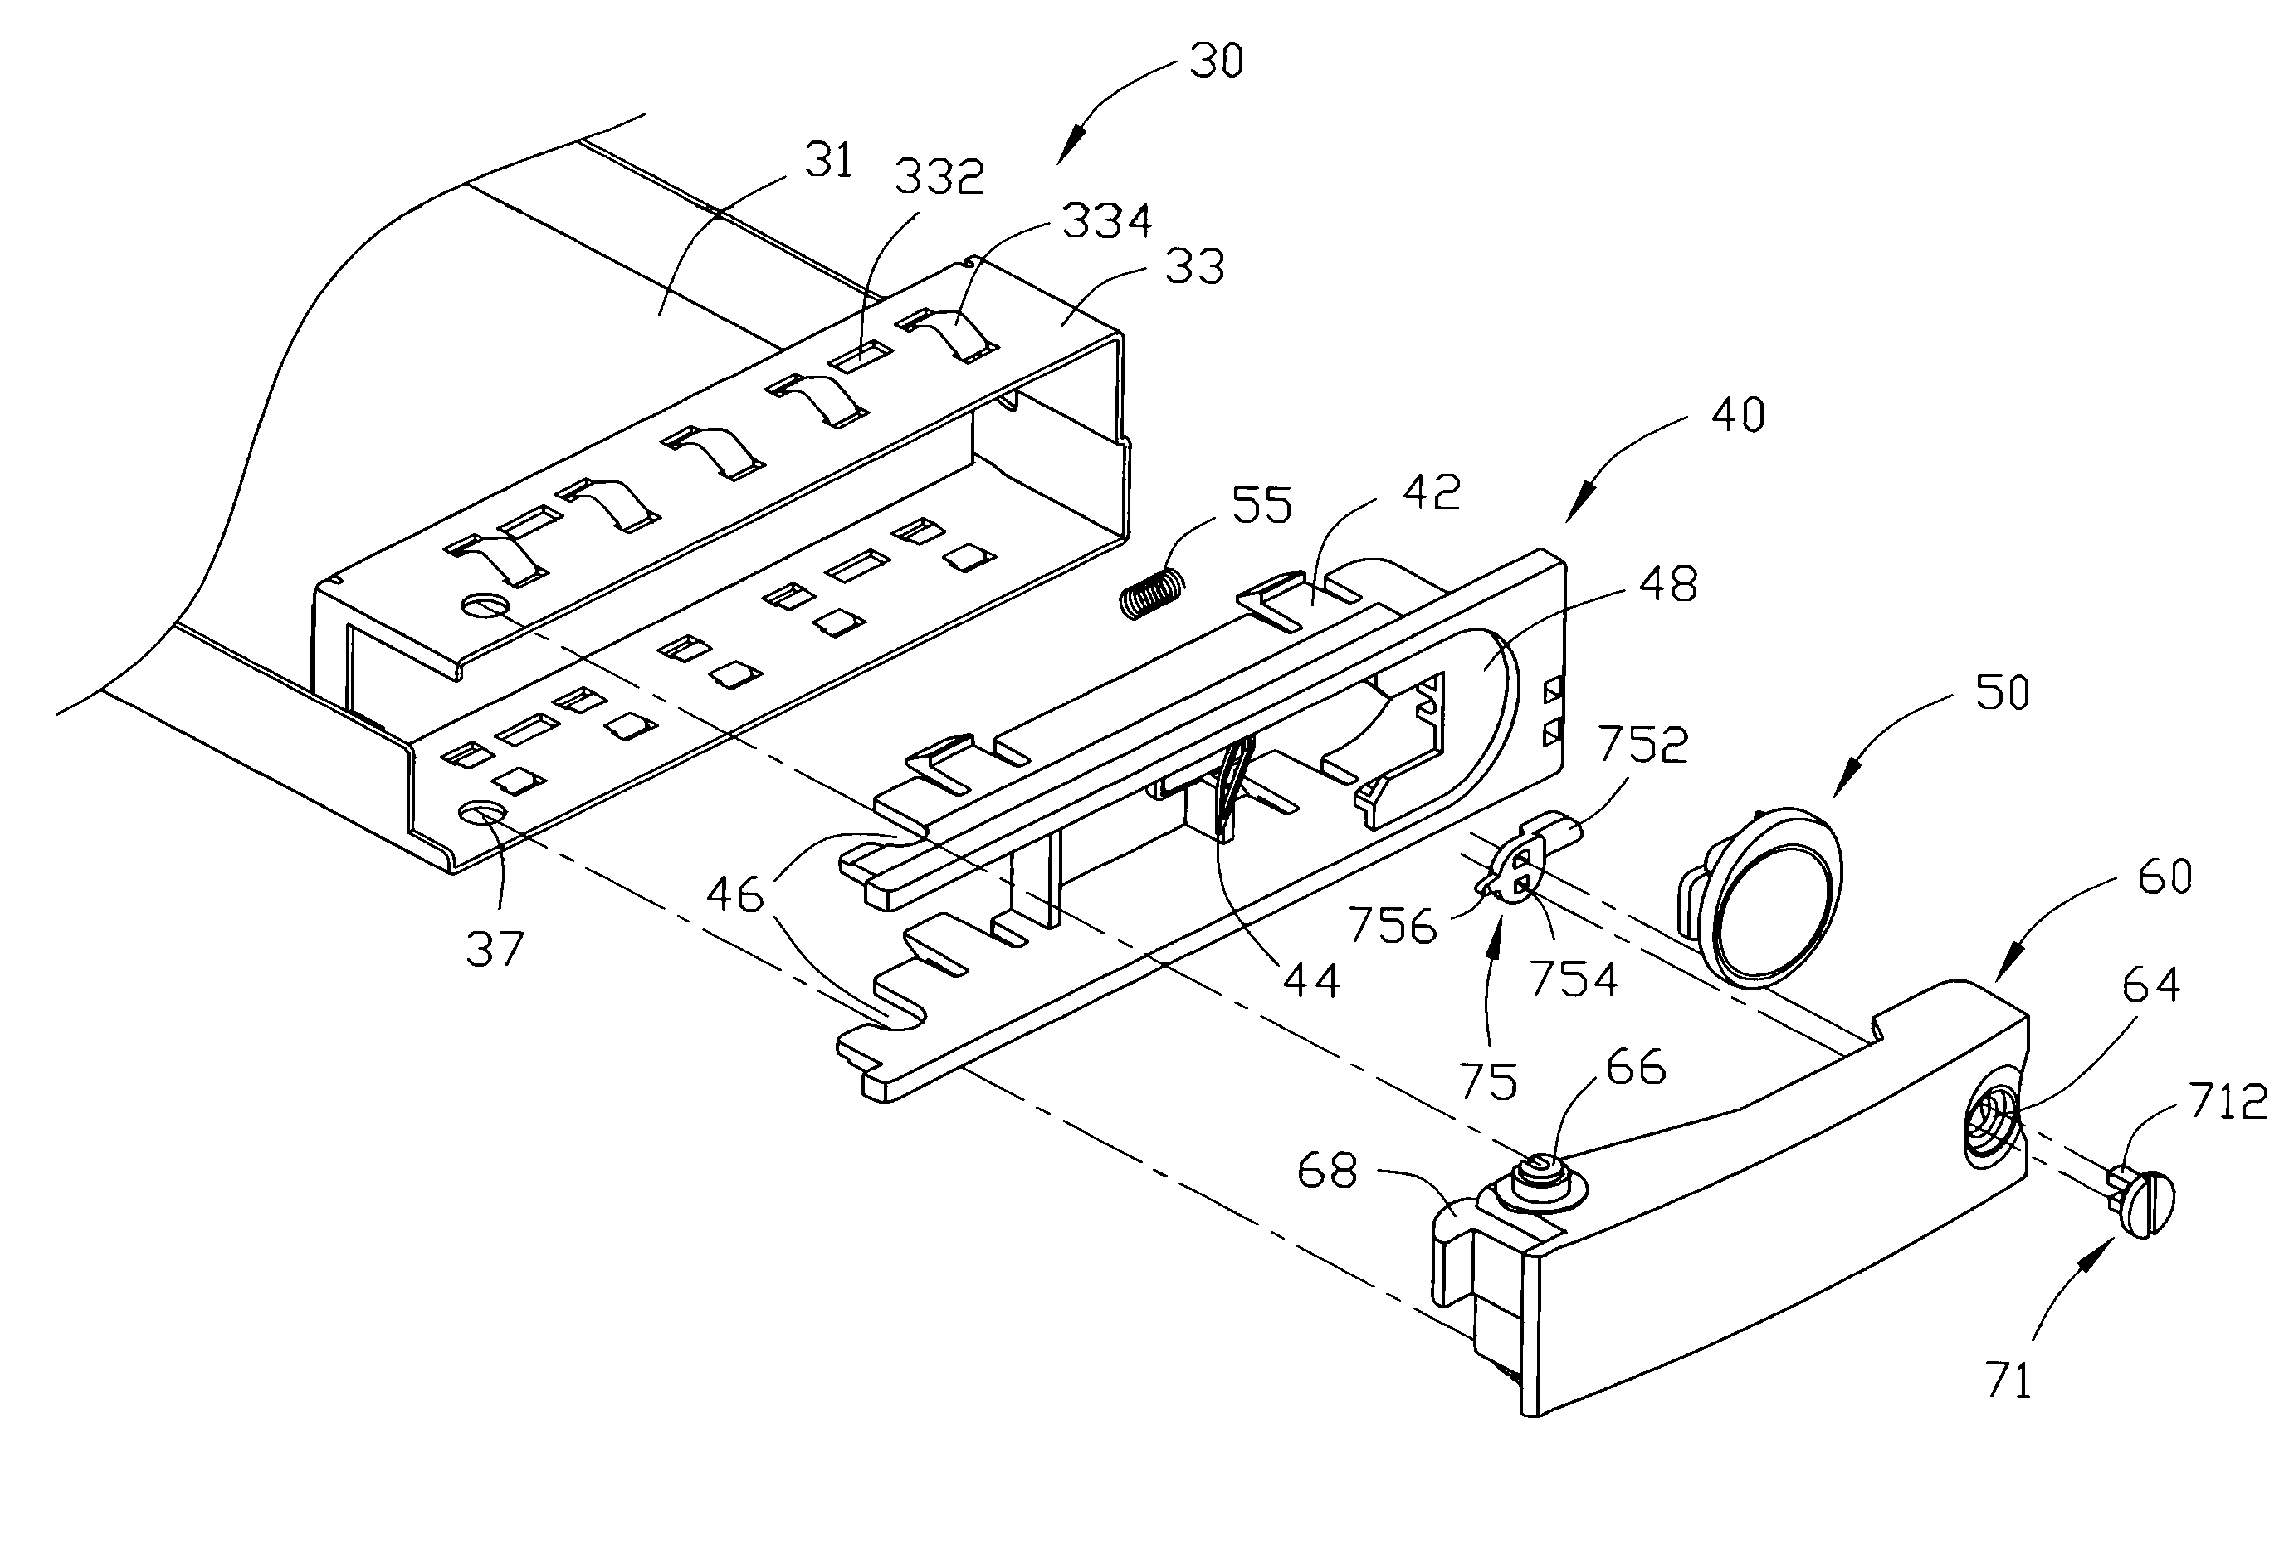 Disk drive carrier assembly